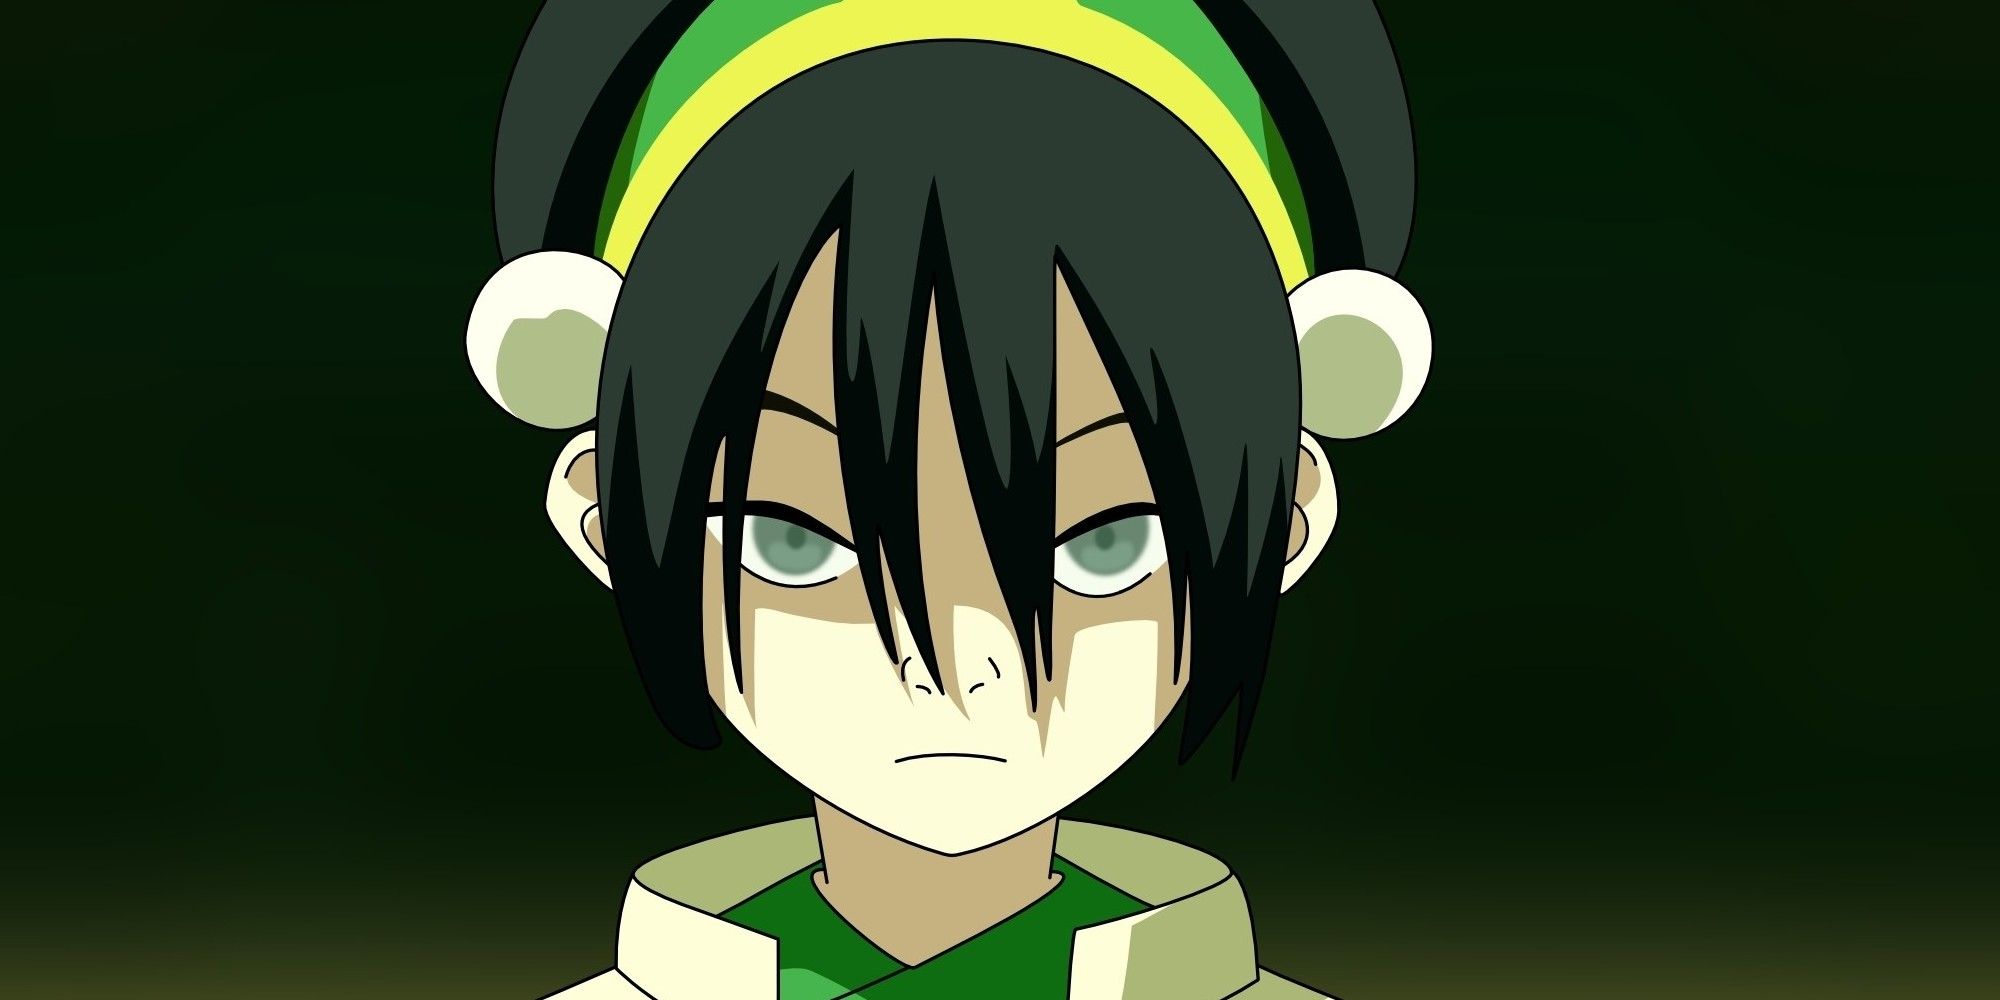 toph beifong stares forward against a green background.